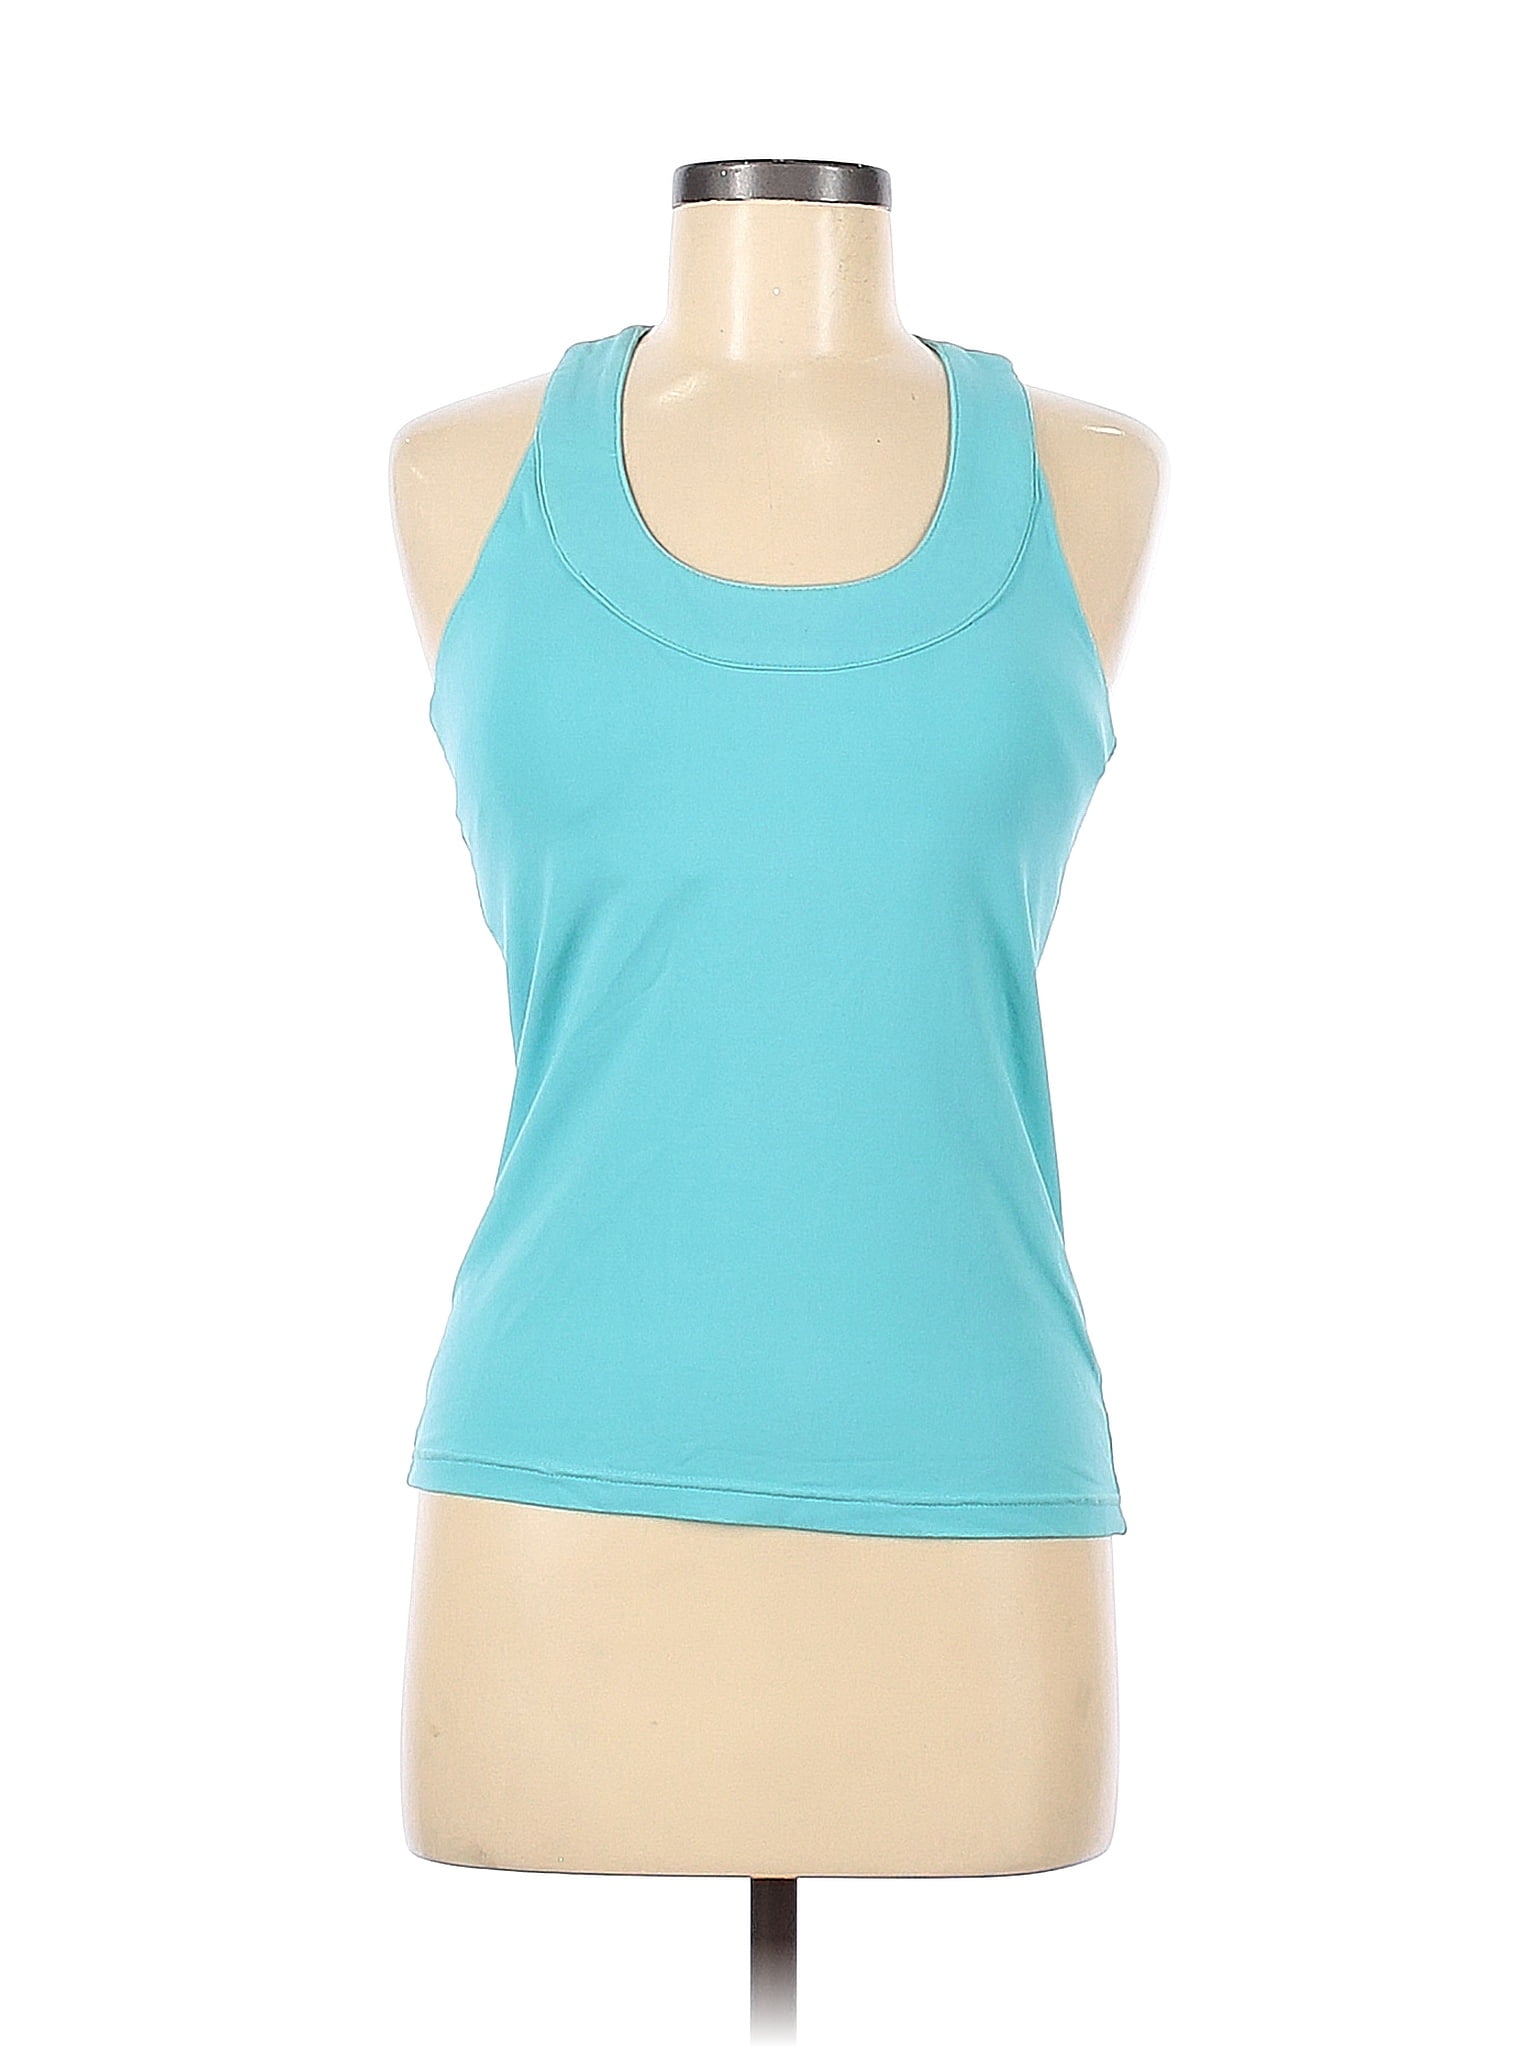 Kyodan Solid Blue Active Tank Size M - 36% off